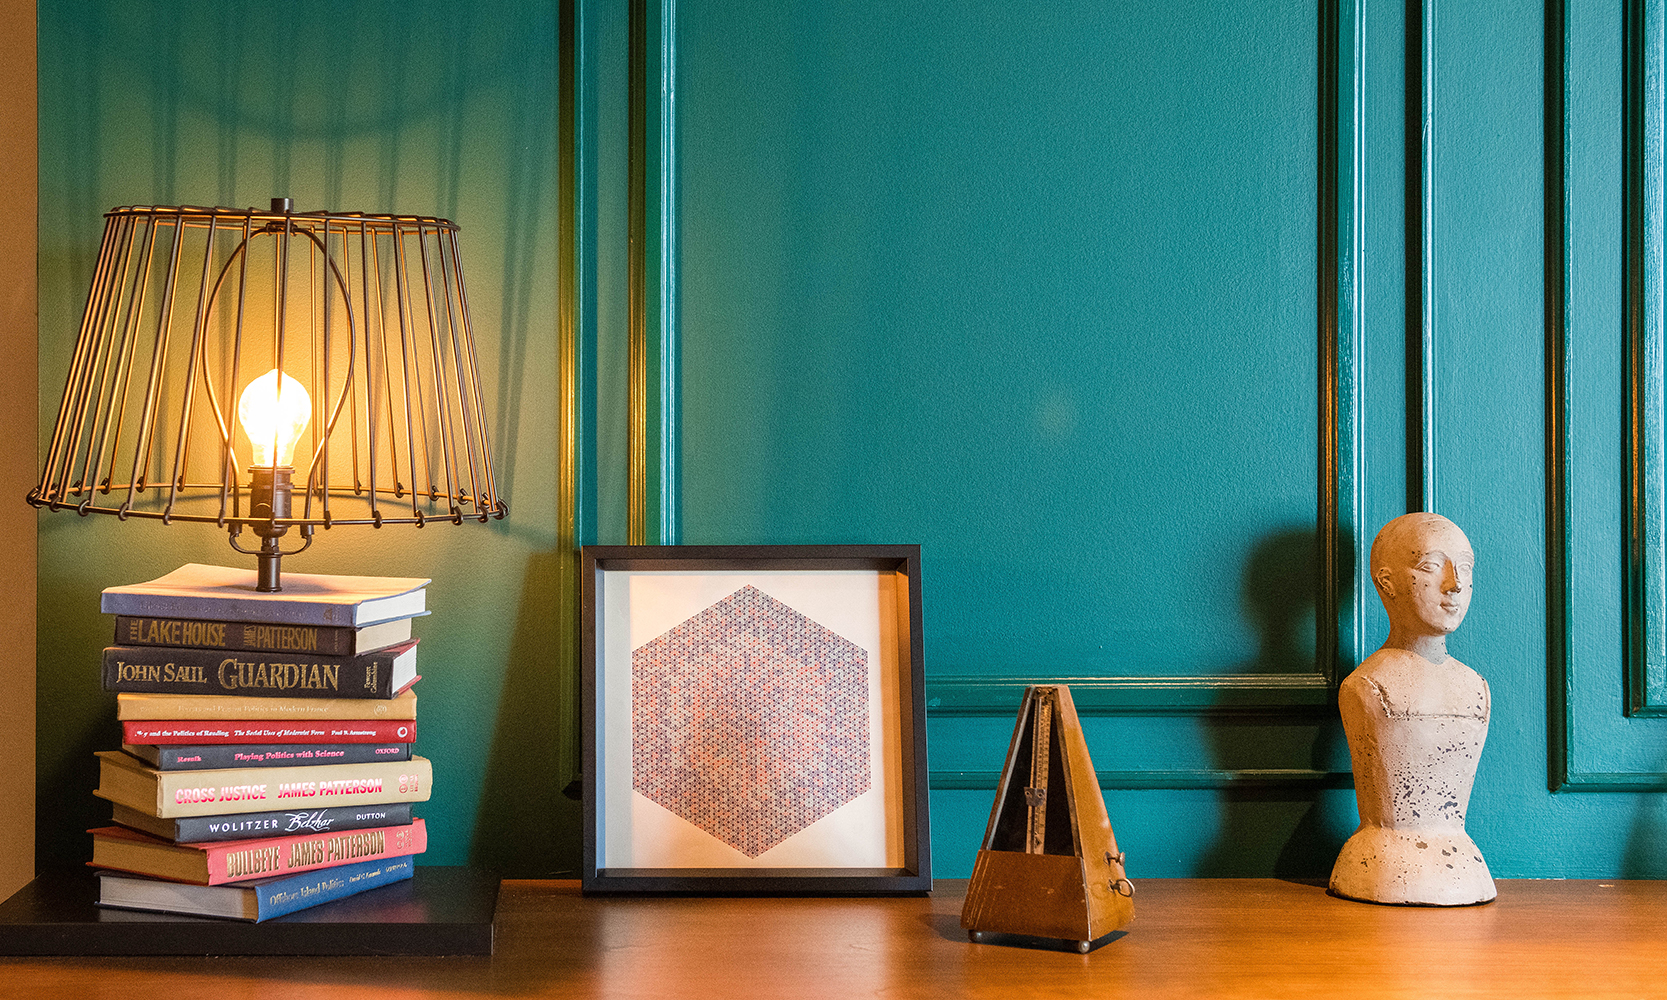 dark green wall with molding details behind a lamp made from stack of books, framed art print vintage metronome and cast bust